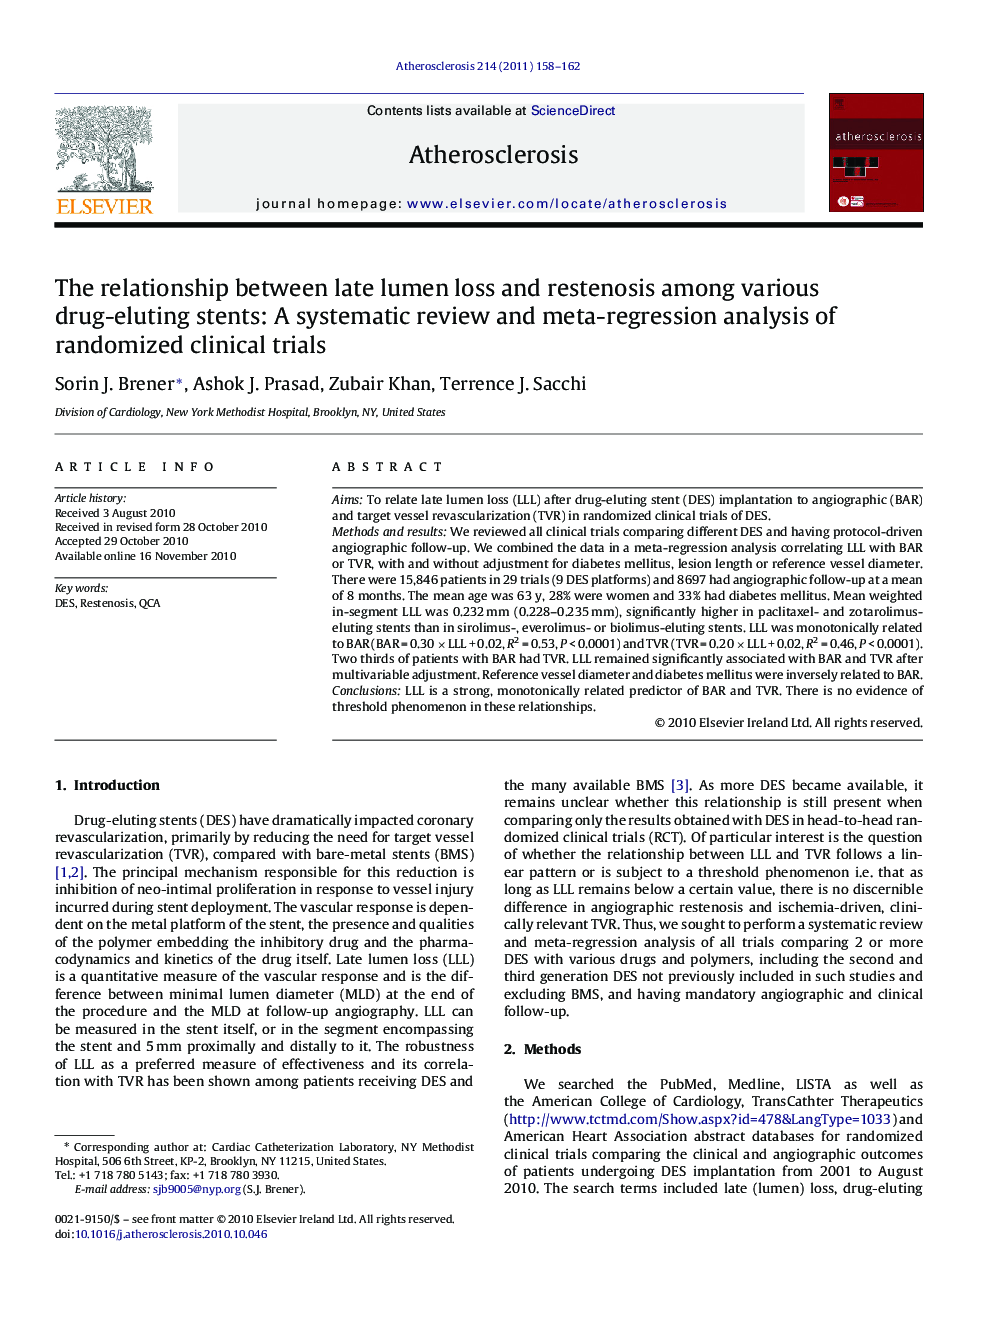 The relationship between late lumen loss and restenosis among various drug-eluting stents: A systematic review and meta-regression analysis of randomized clinical trials